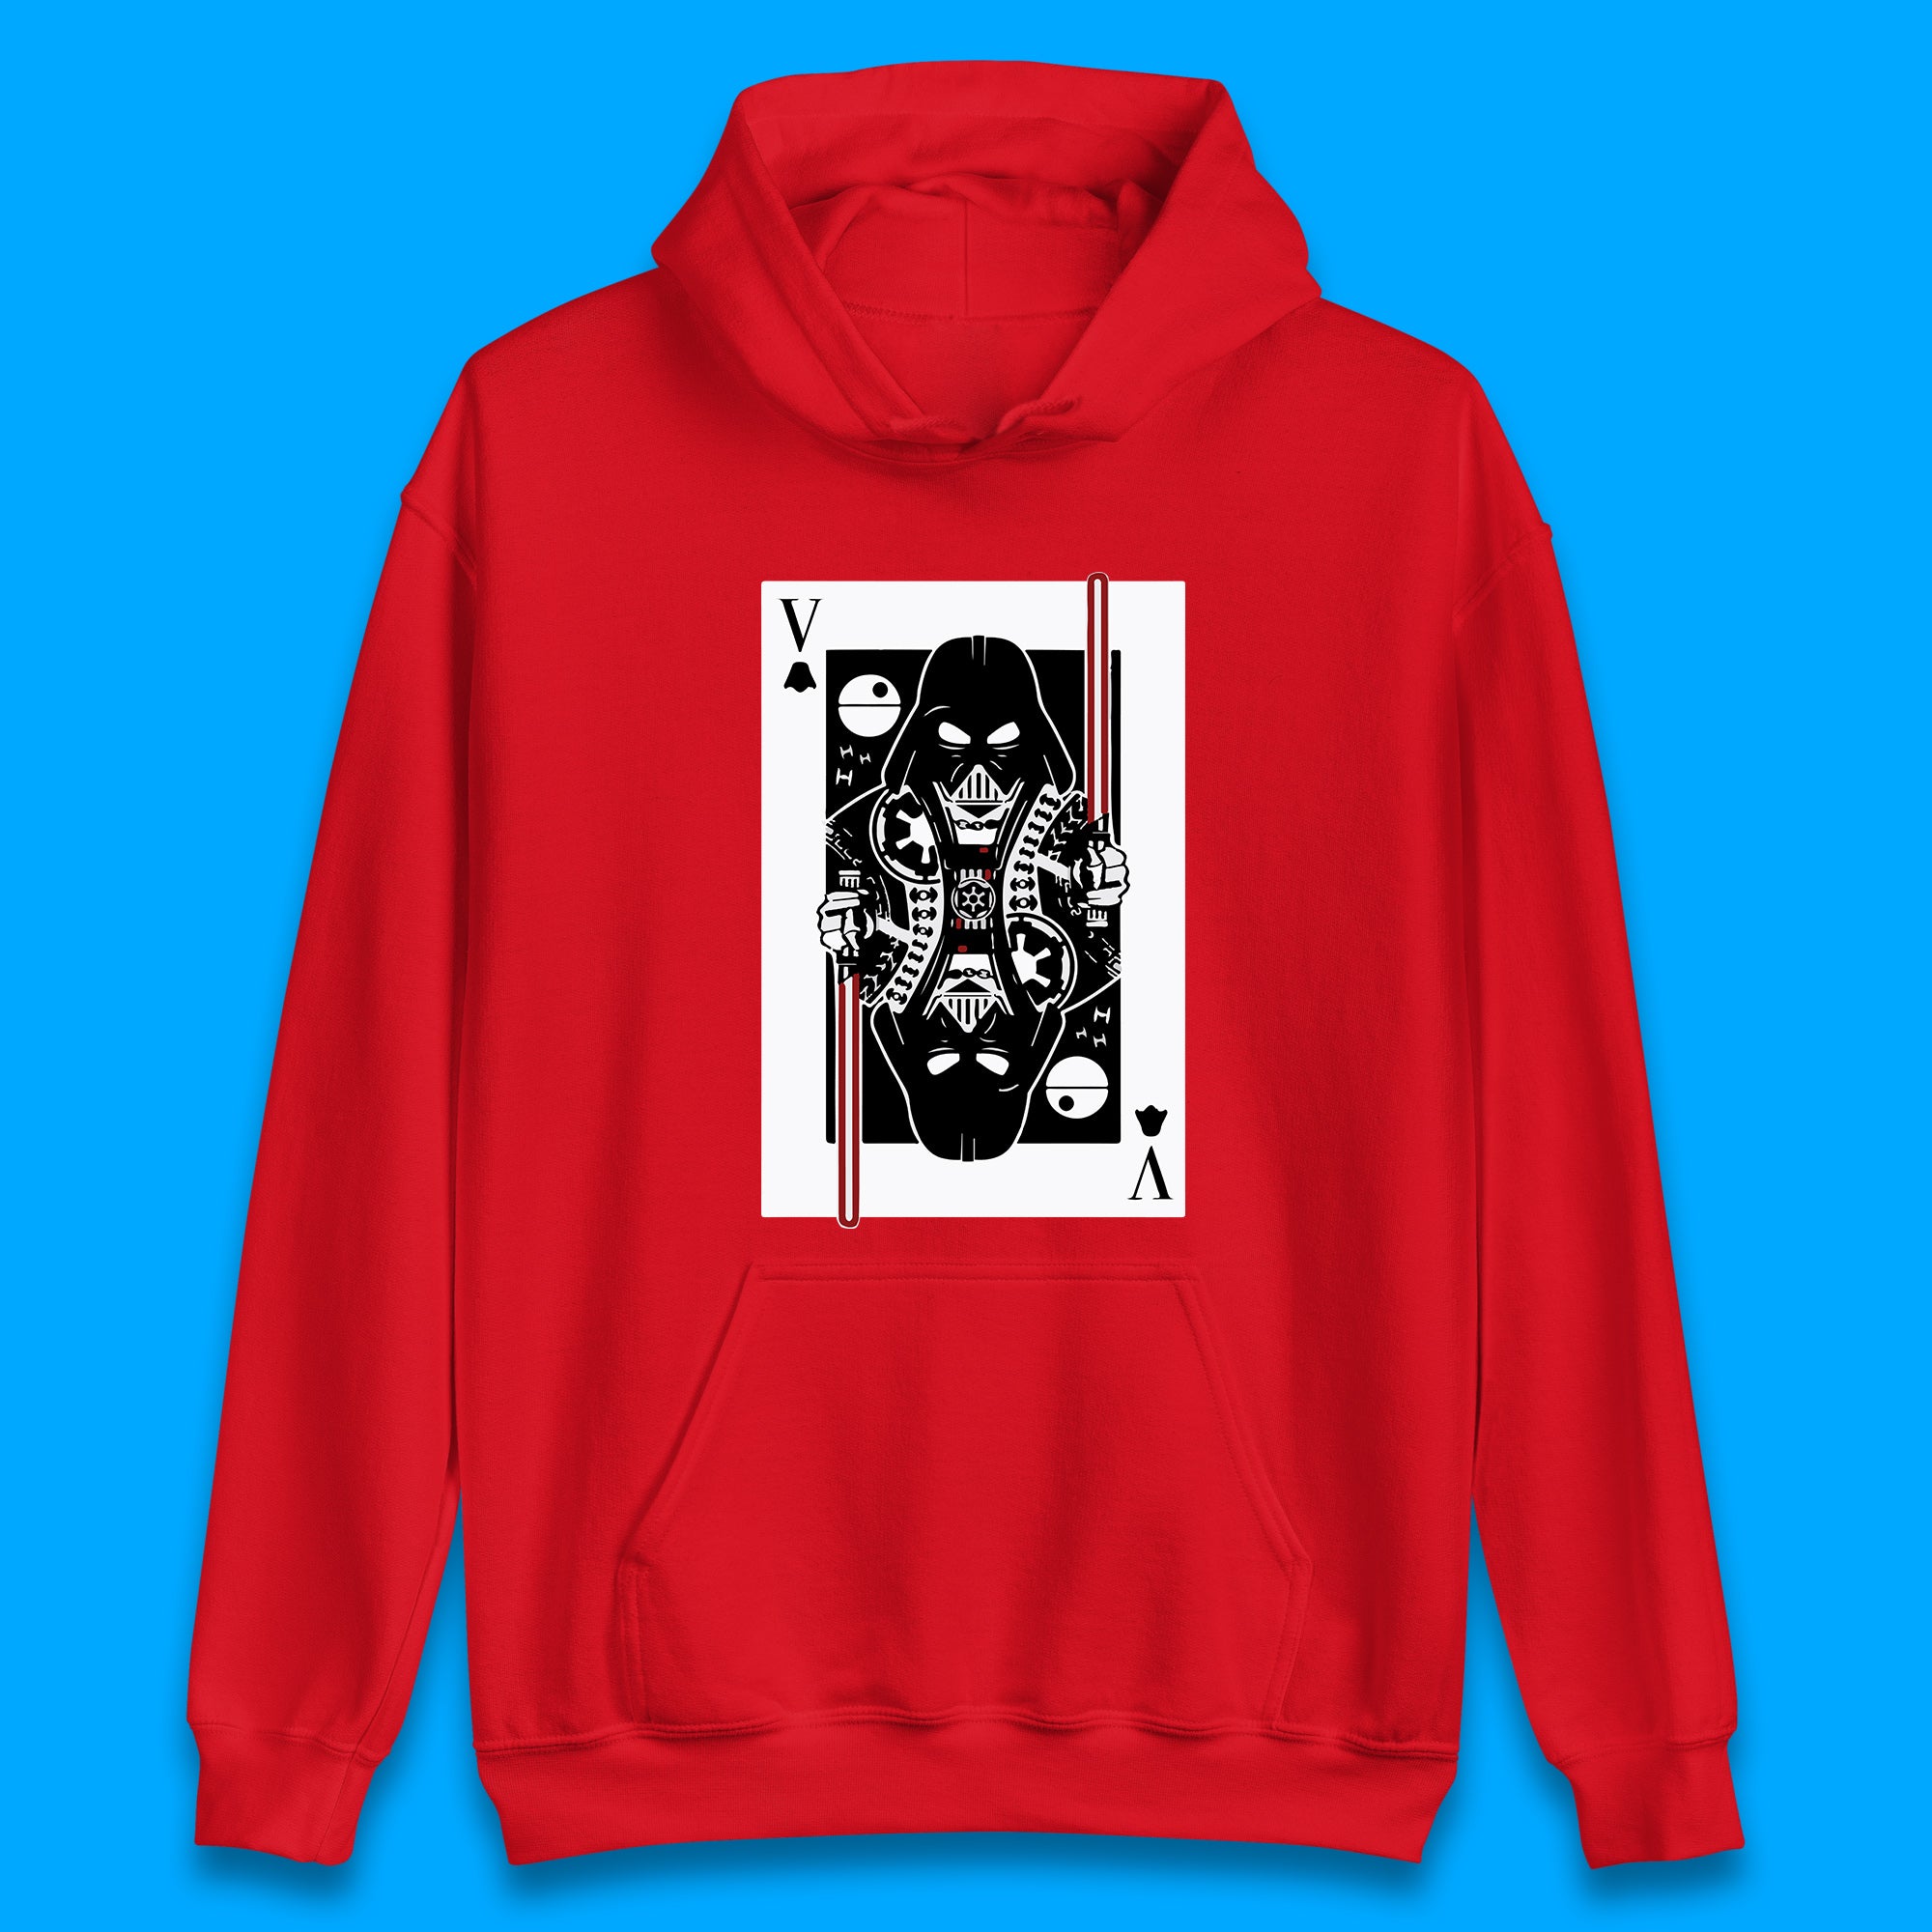 Star Wars Fictional Character Darth Vader Playing Card Vader King Card Sci-fi Action Adventure Movie 46th Anniversary Unisex Hoodie